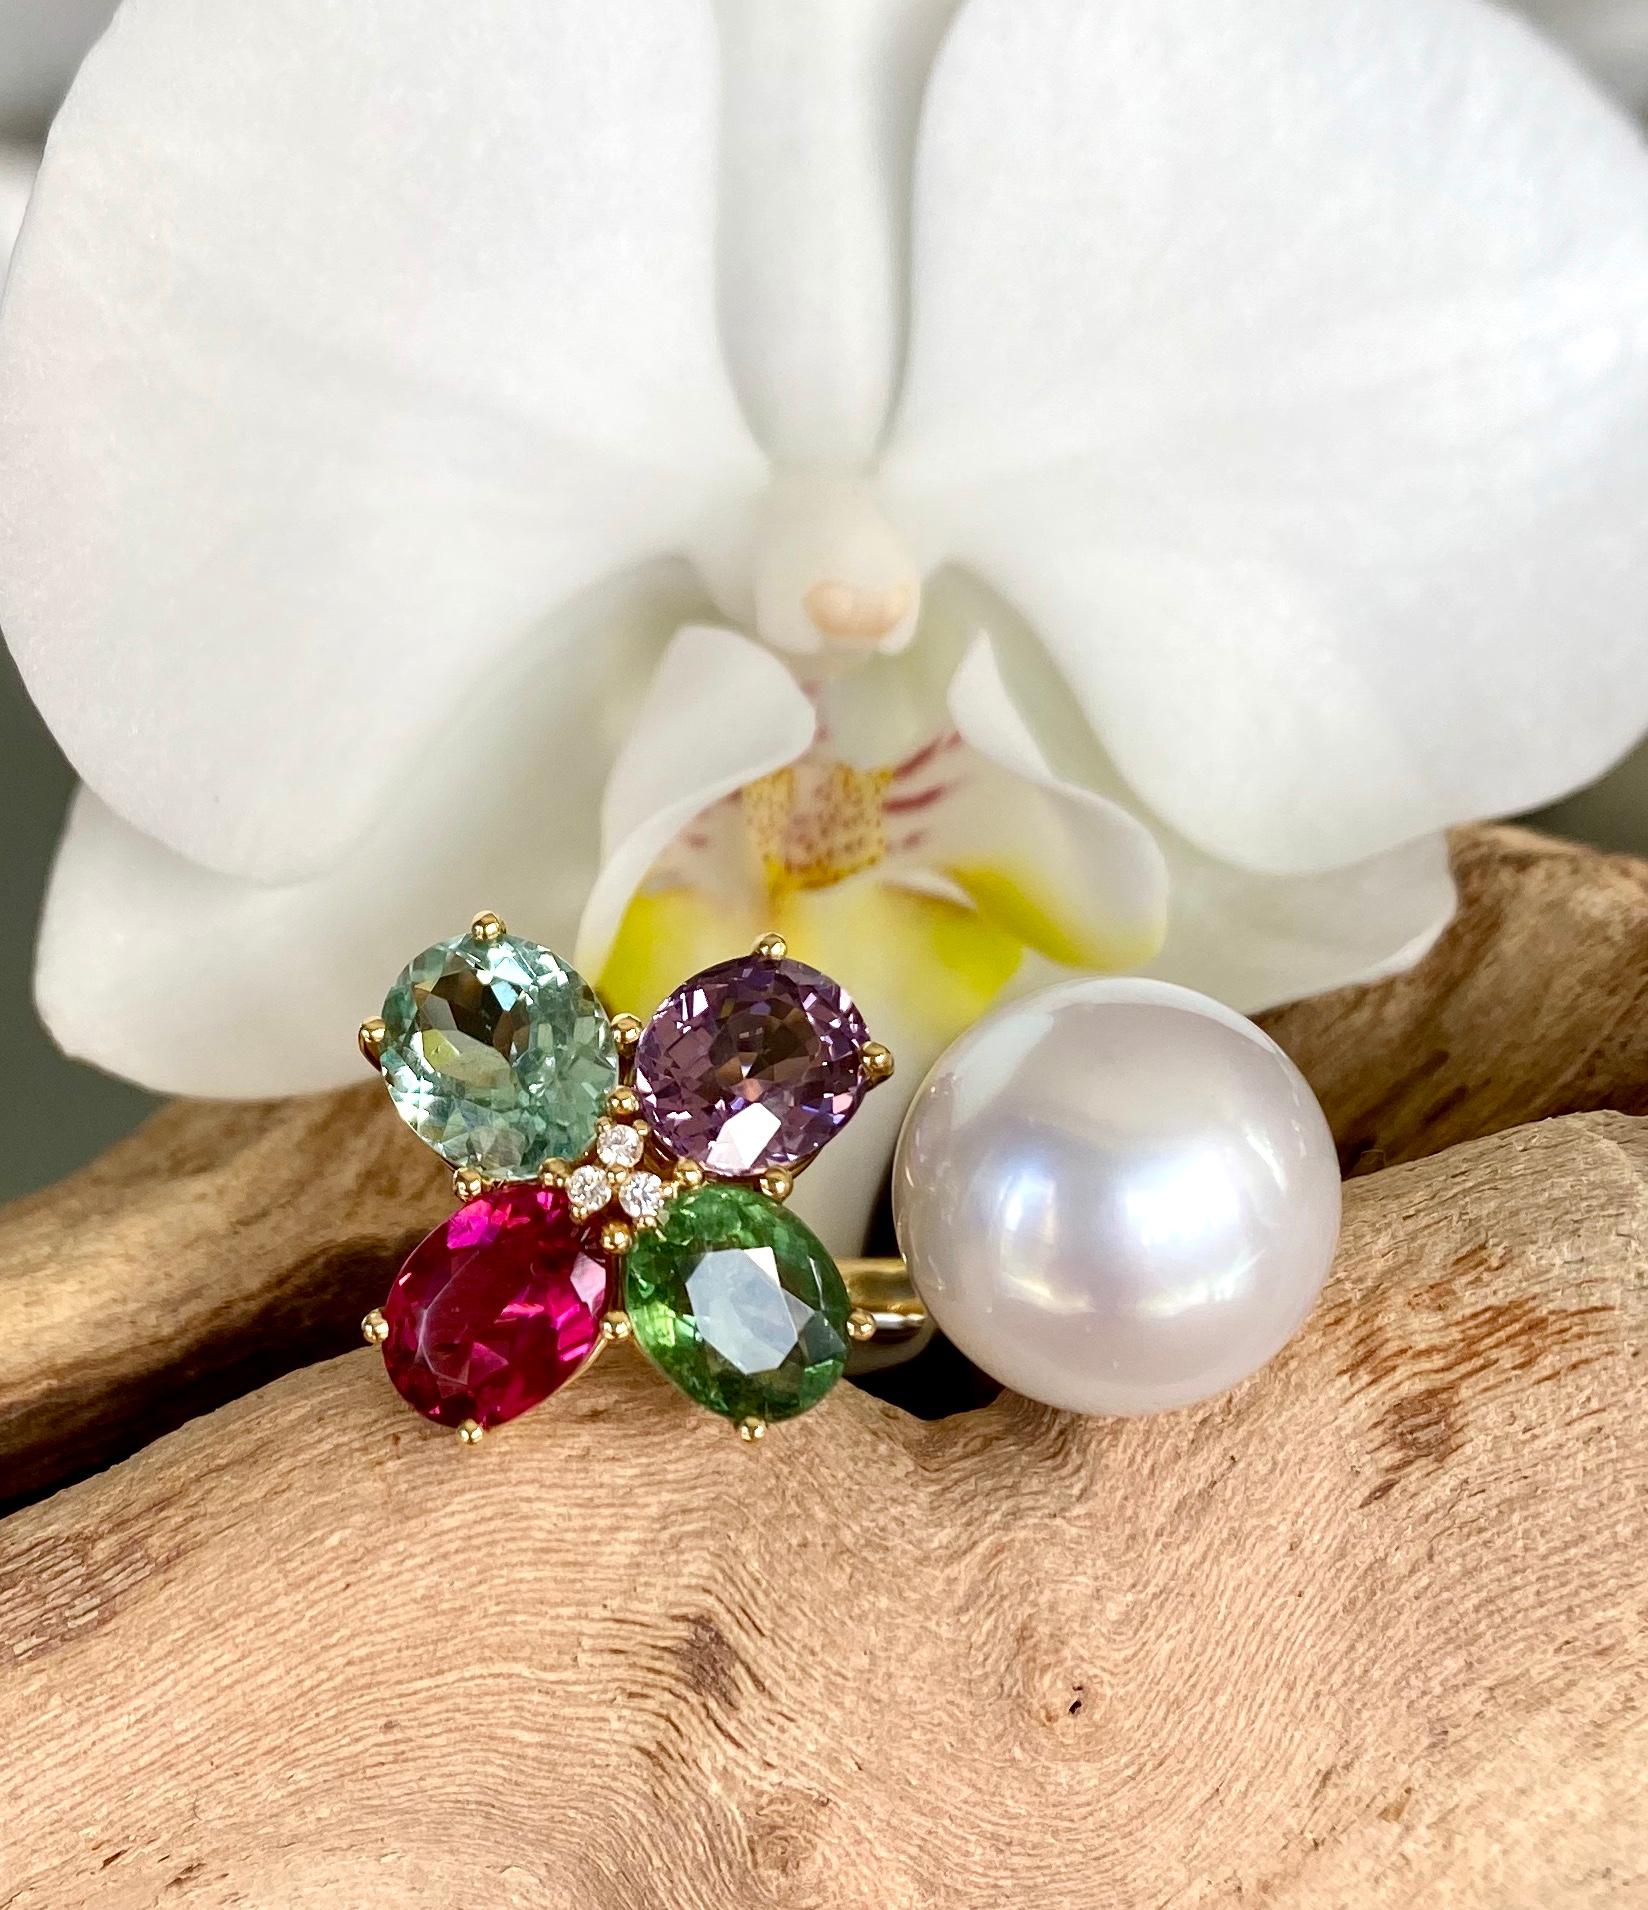 A two-in-one ring of a white South Sea pearl, rubellite and green tourmalines, aquamarine, sapphire and diamonds, handcrafted in 18 karat yellow gold.

This gorgeous one-of-a-kind ring combines a lustrous and luminous South Sea pearl with a